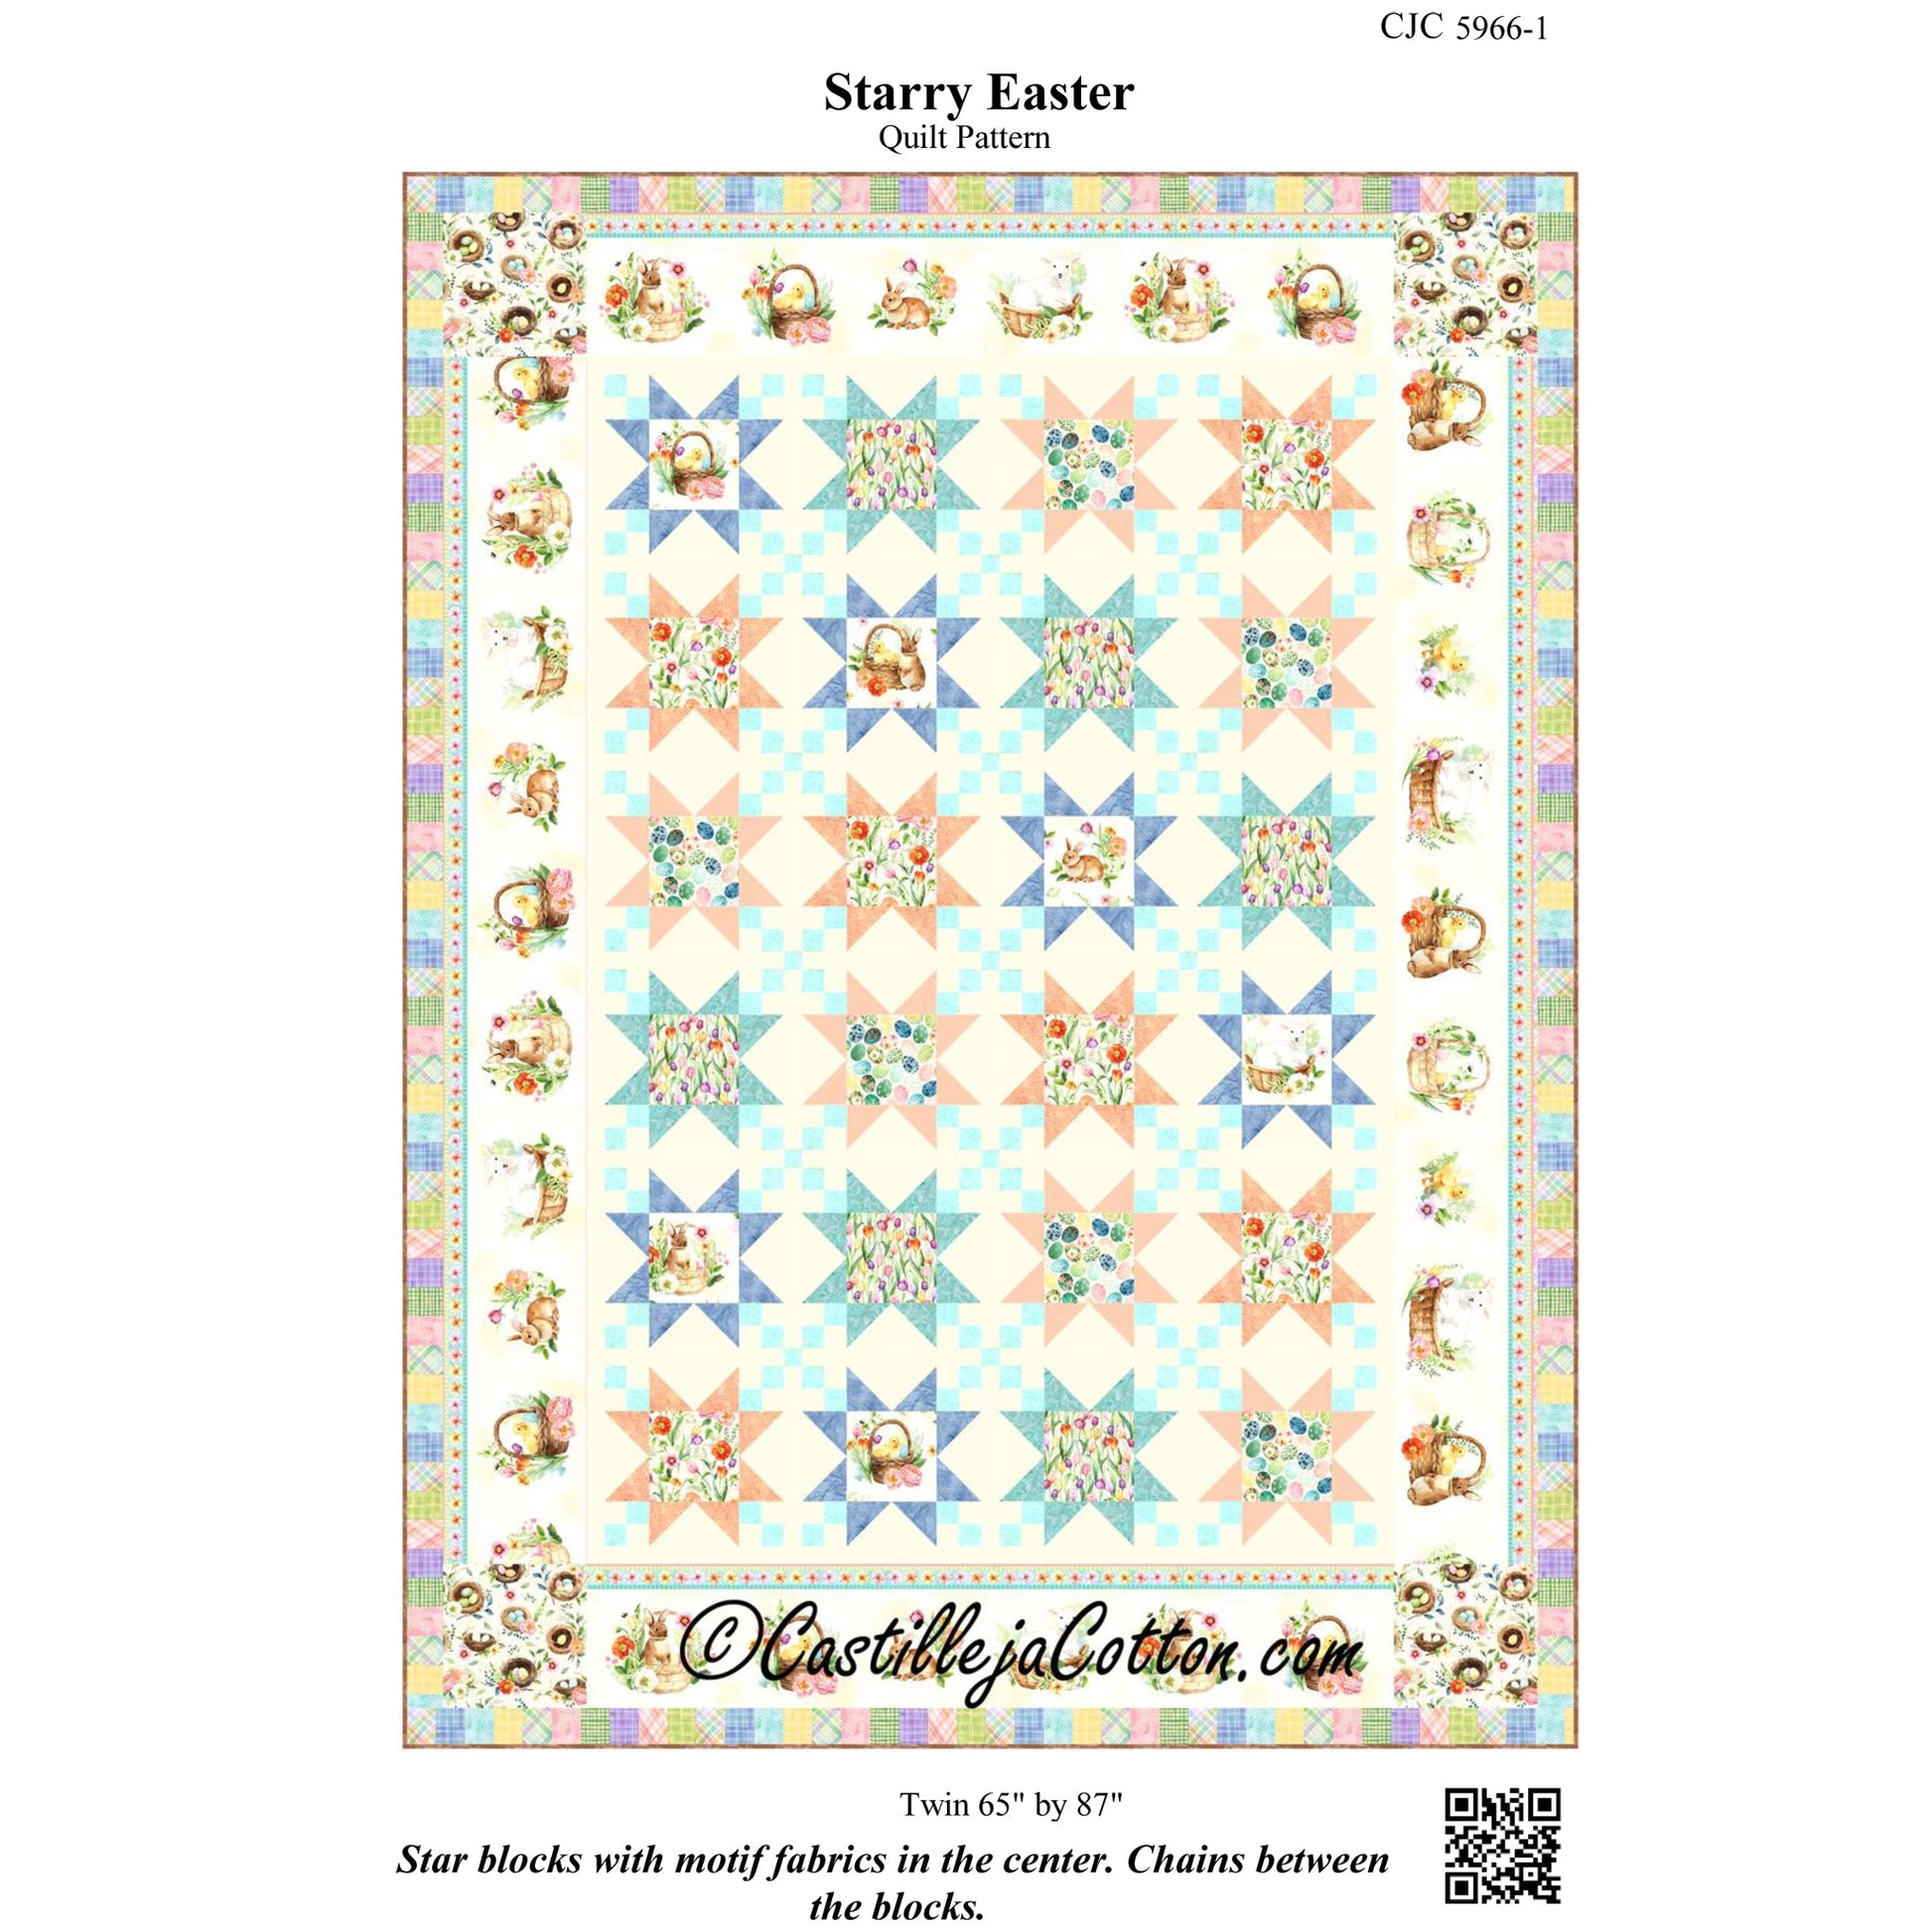 Cover image of pattern for Starry Easter quilt.